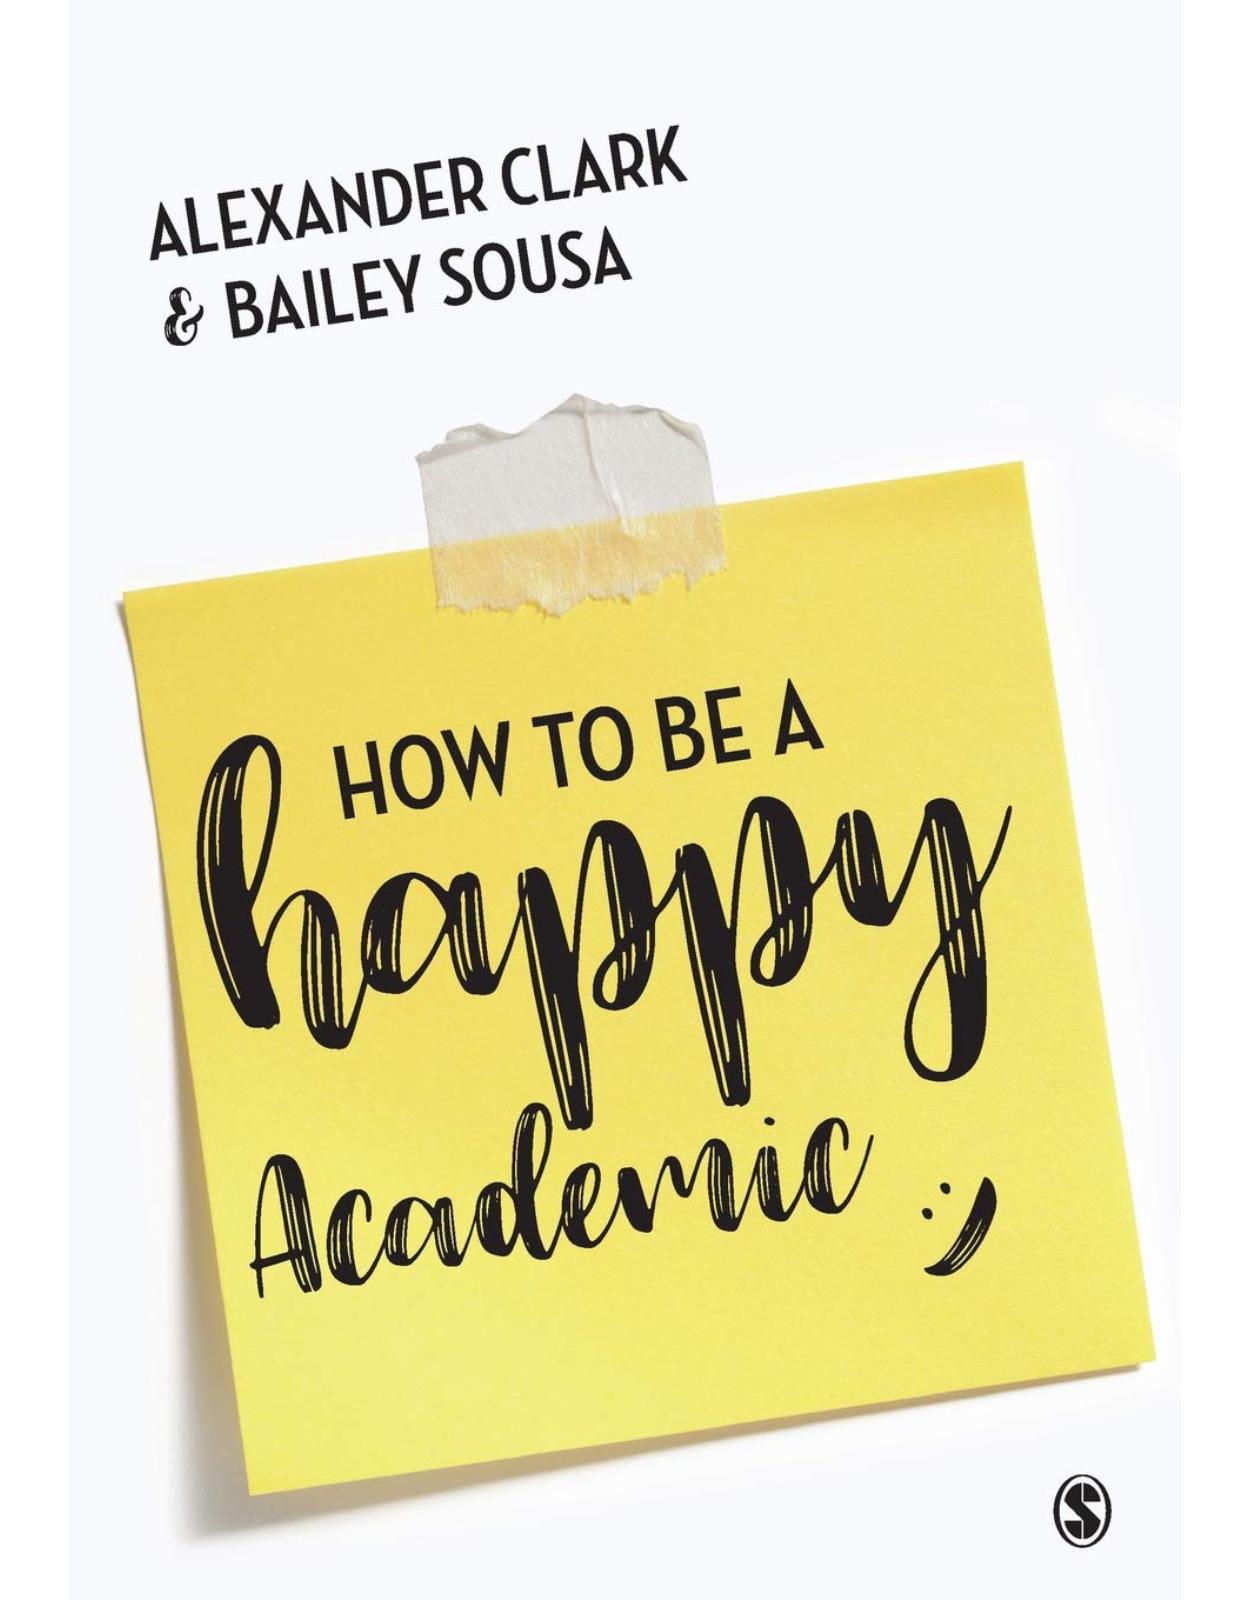 How to Be a Happy Academic. A Guide to Being Effective in Research, Writing and Teaching